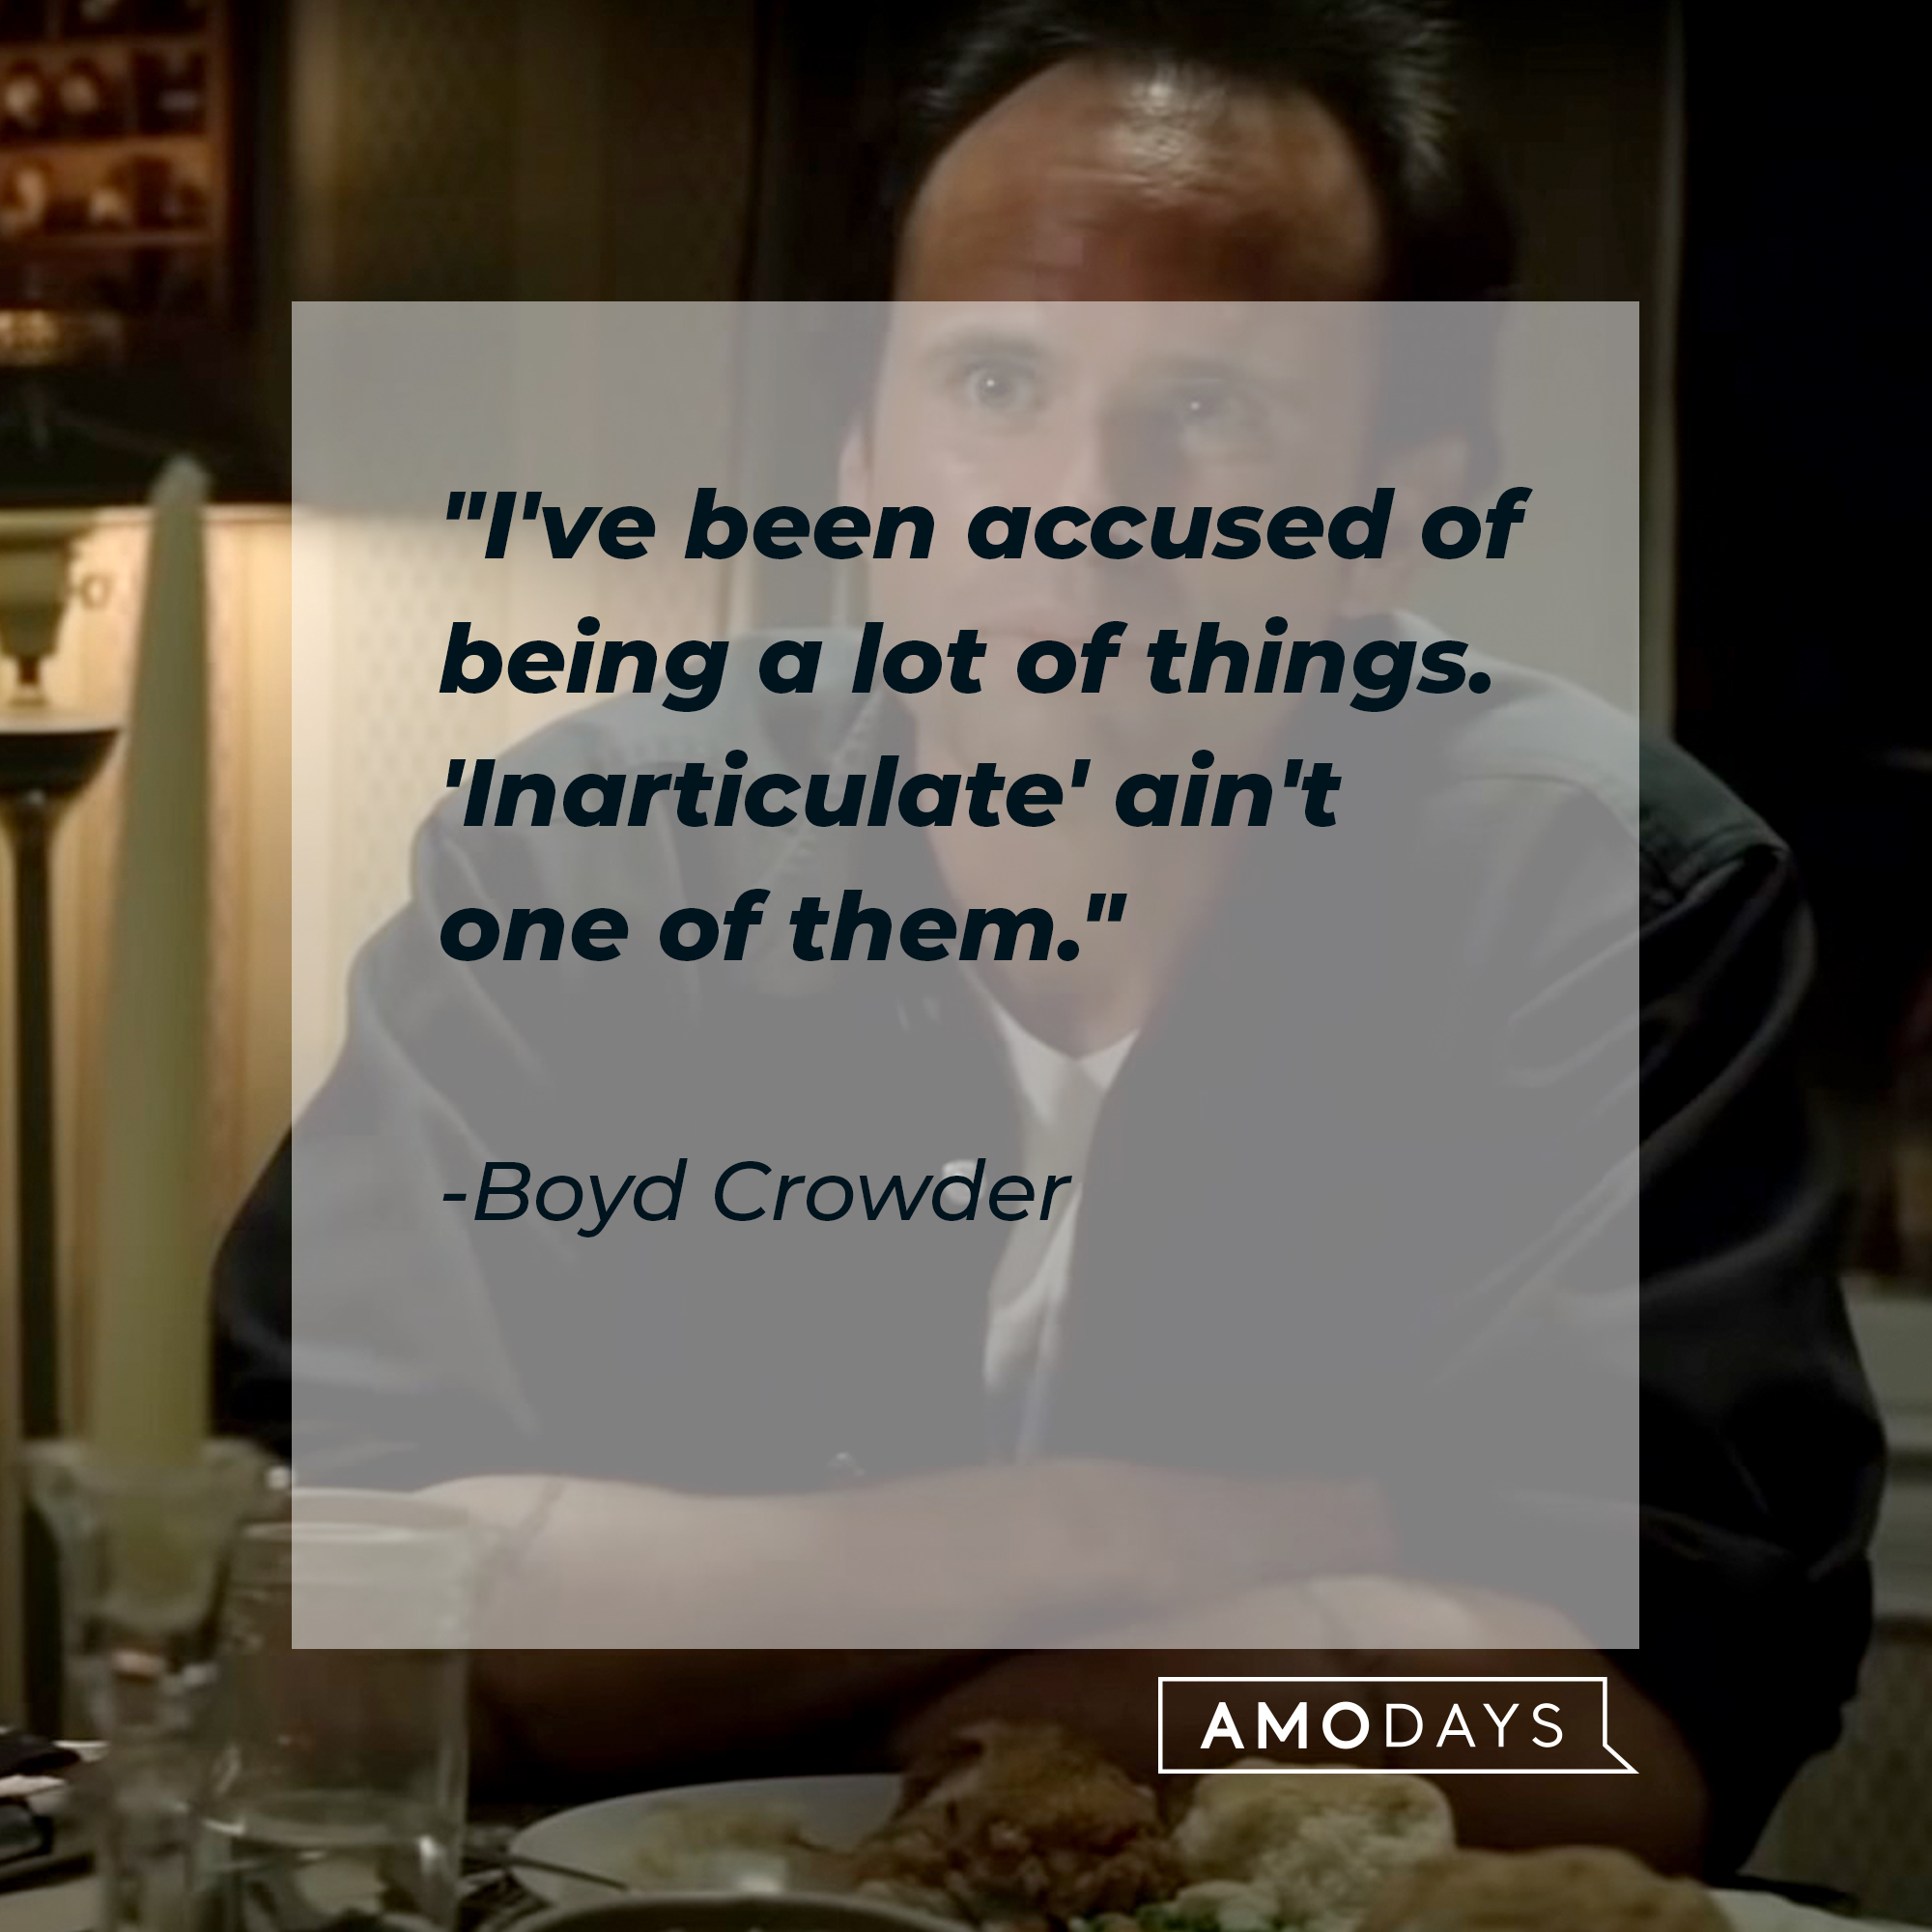 An image of  Boyd Crowder with his quote: "I've been accused of being a lot of things. 'Inarticulate' ain't one of them."  | Source:  youtube.com/FXNetworks